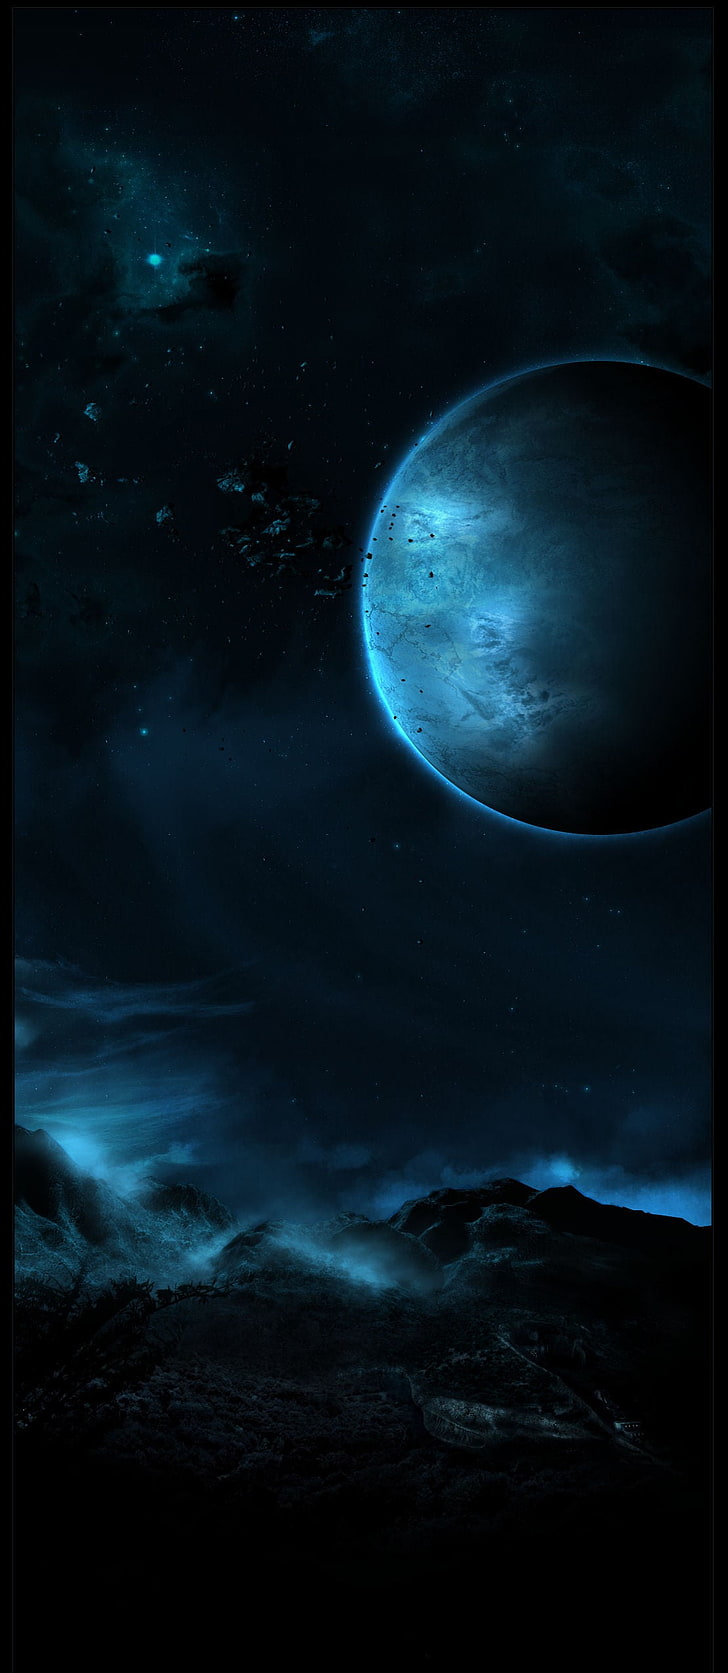 mountain and full moon wallpaper, space, planet, space art, artwork